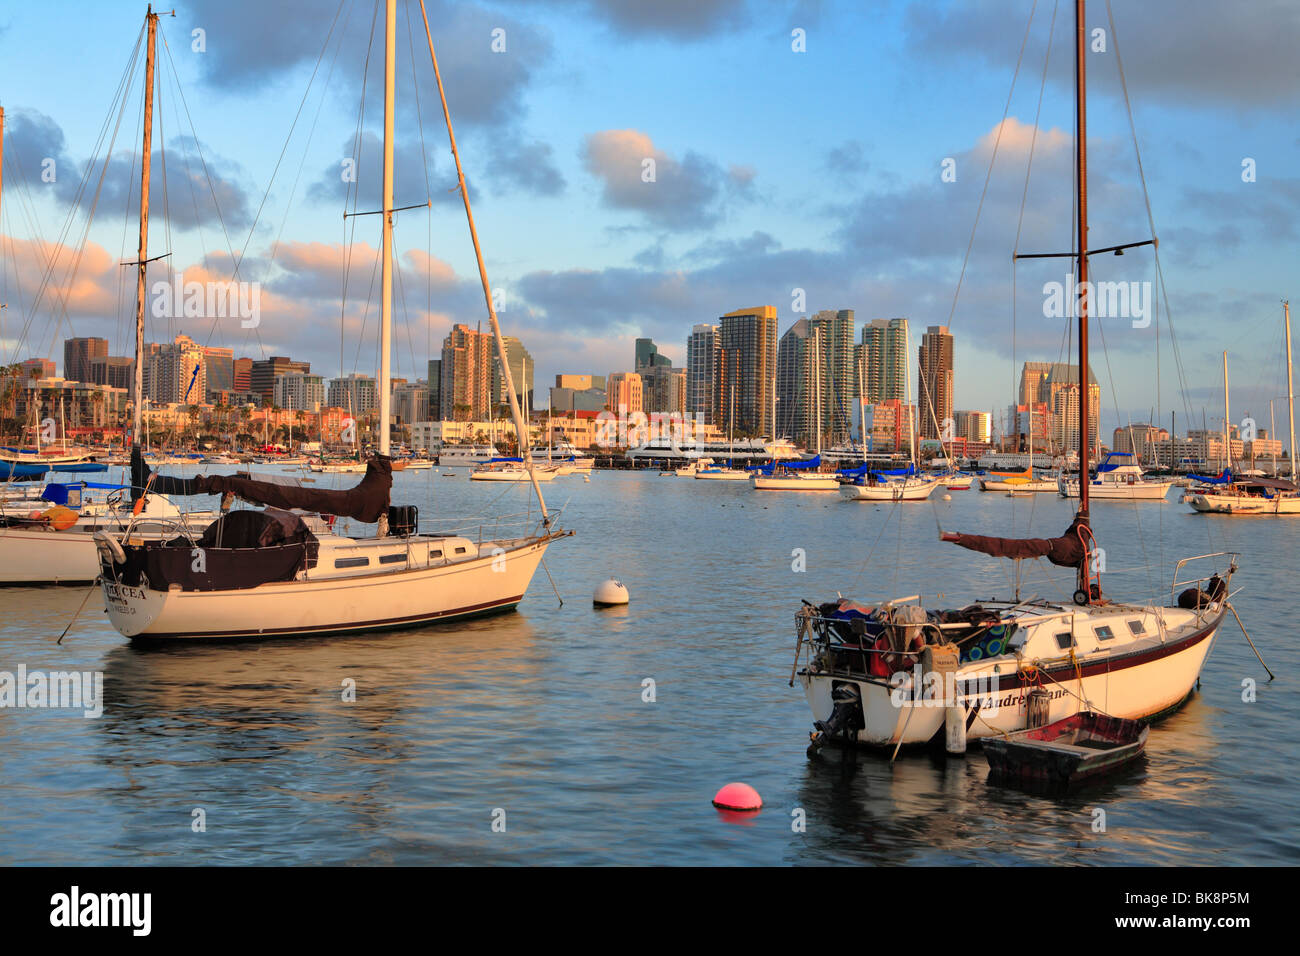 Moored sailboats with San Diego city skyline in background at sunset-San Diego, California, USA. Stock Photo